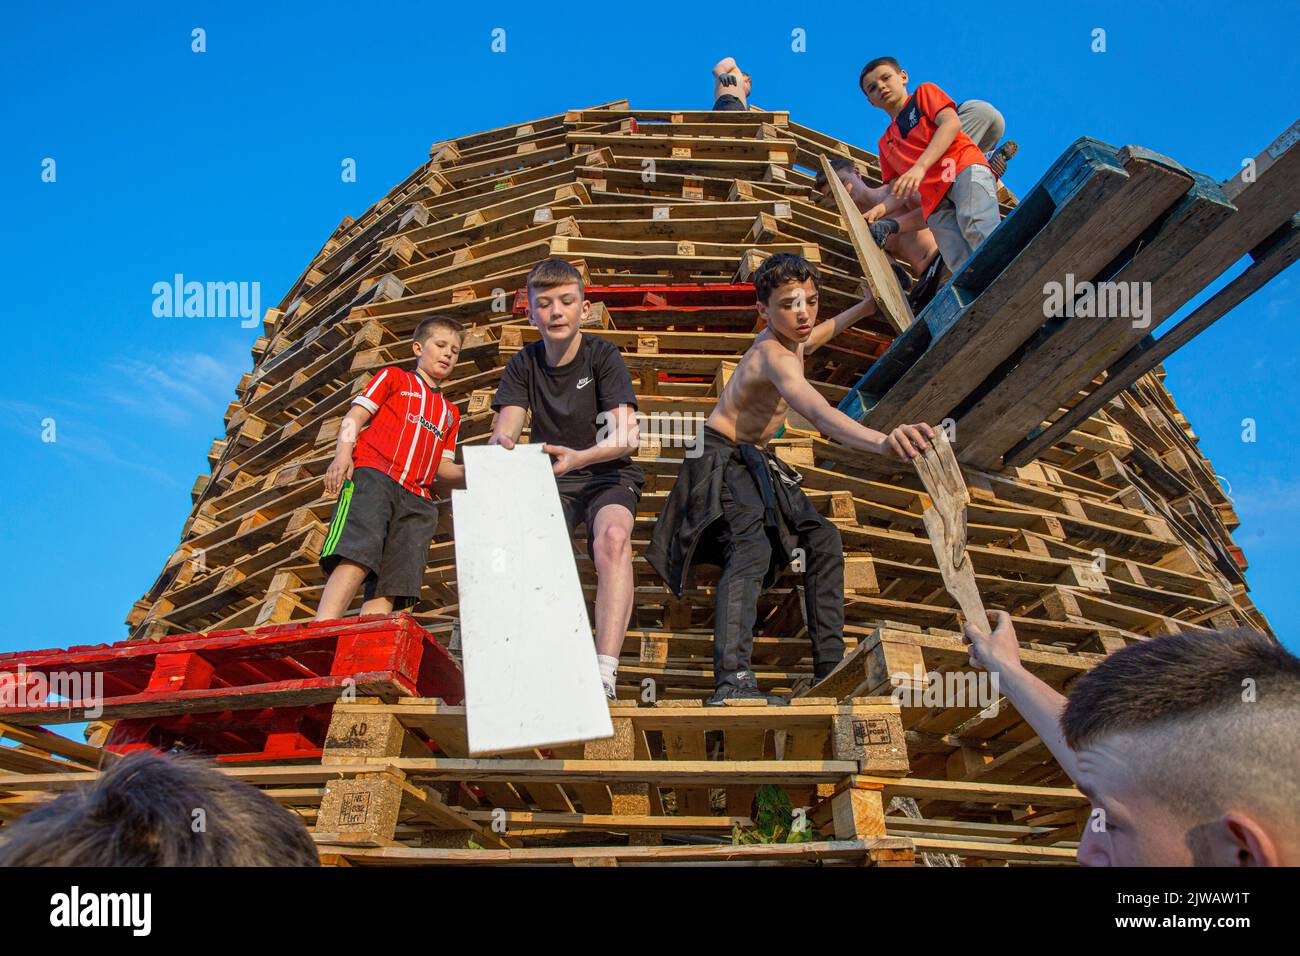 Kids stack pallets over the weekend in preparation for the bonfire marking a Catholic feast day of the Assumption of the Virgin Mary in the Bogside ar Stock Photo